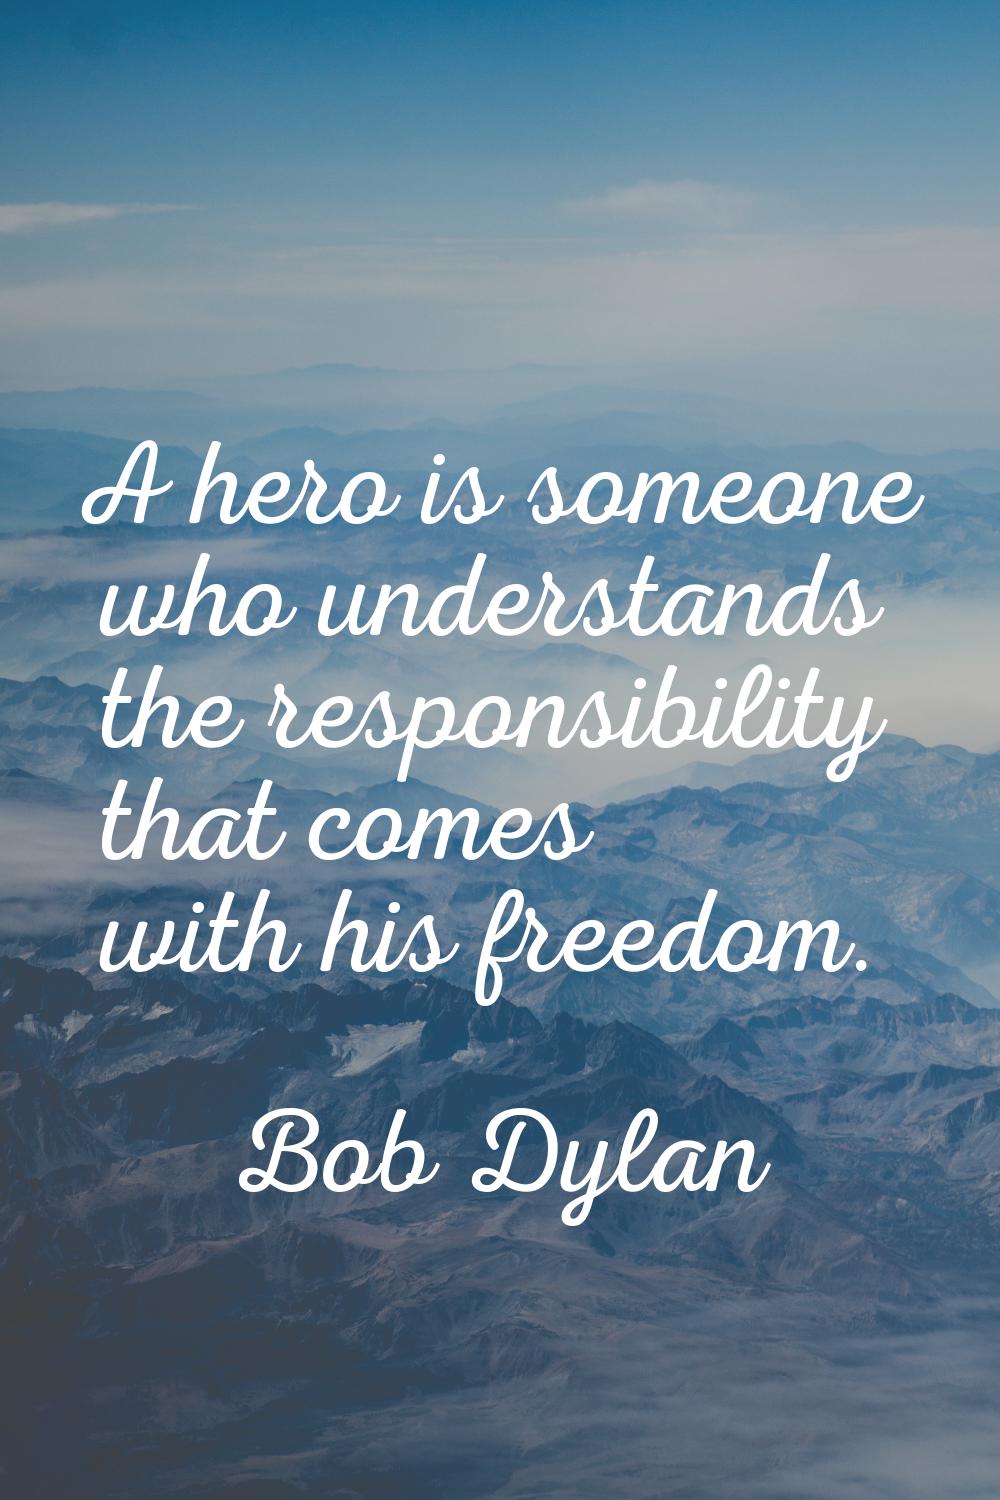 A hero is someone who understands the responsibility that comes with his freedom.